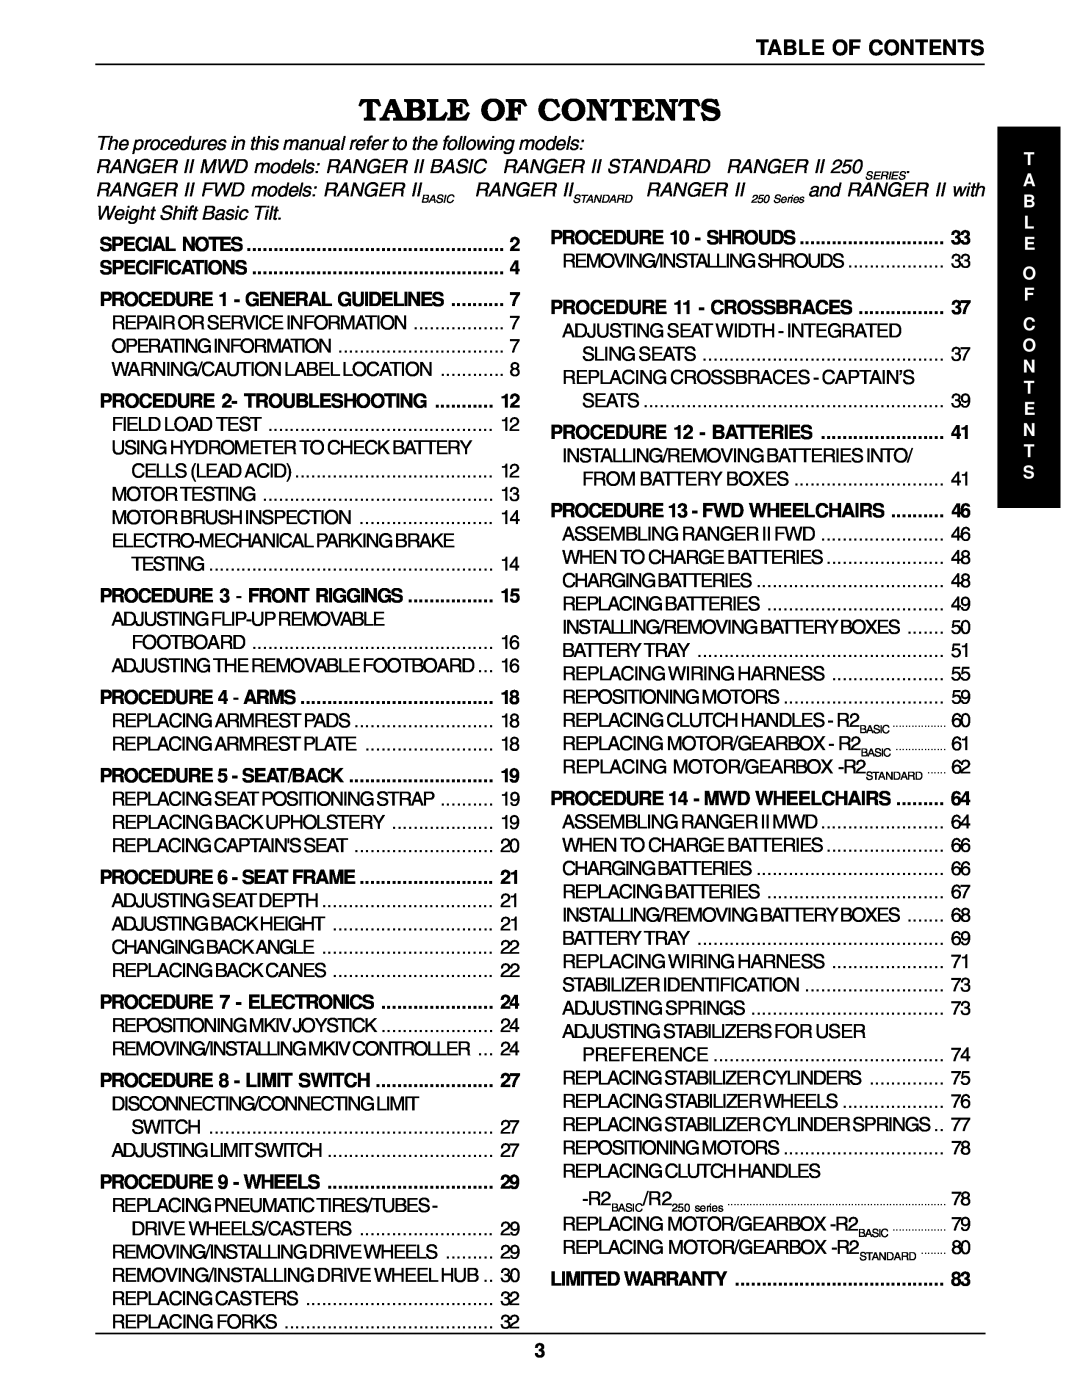 Invacare Ranger II250 SERIES, Ranger IIJR Table Of Contents, The procedures in this manual refer to the following models 